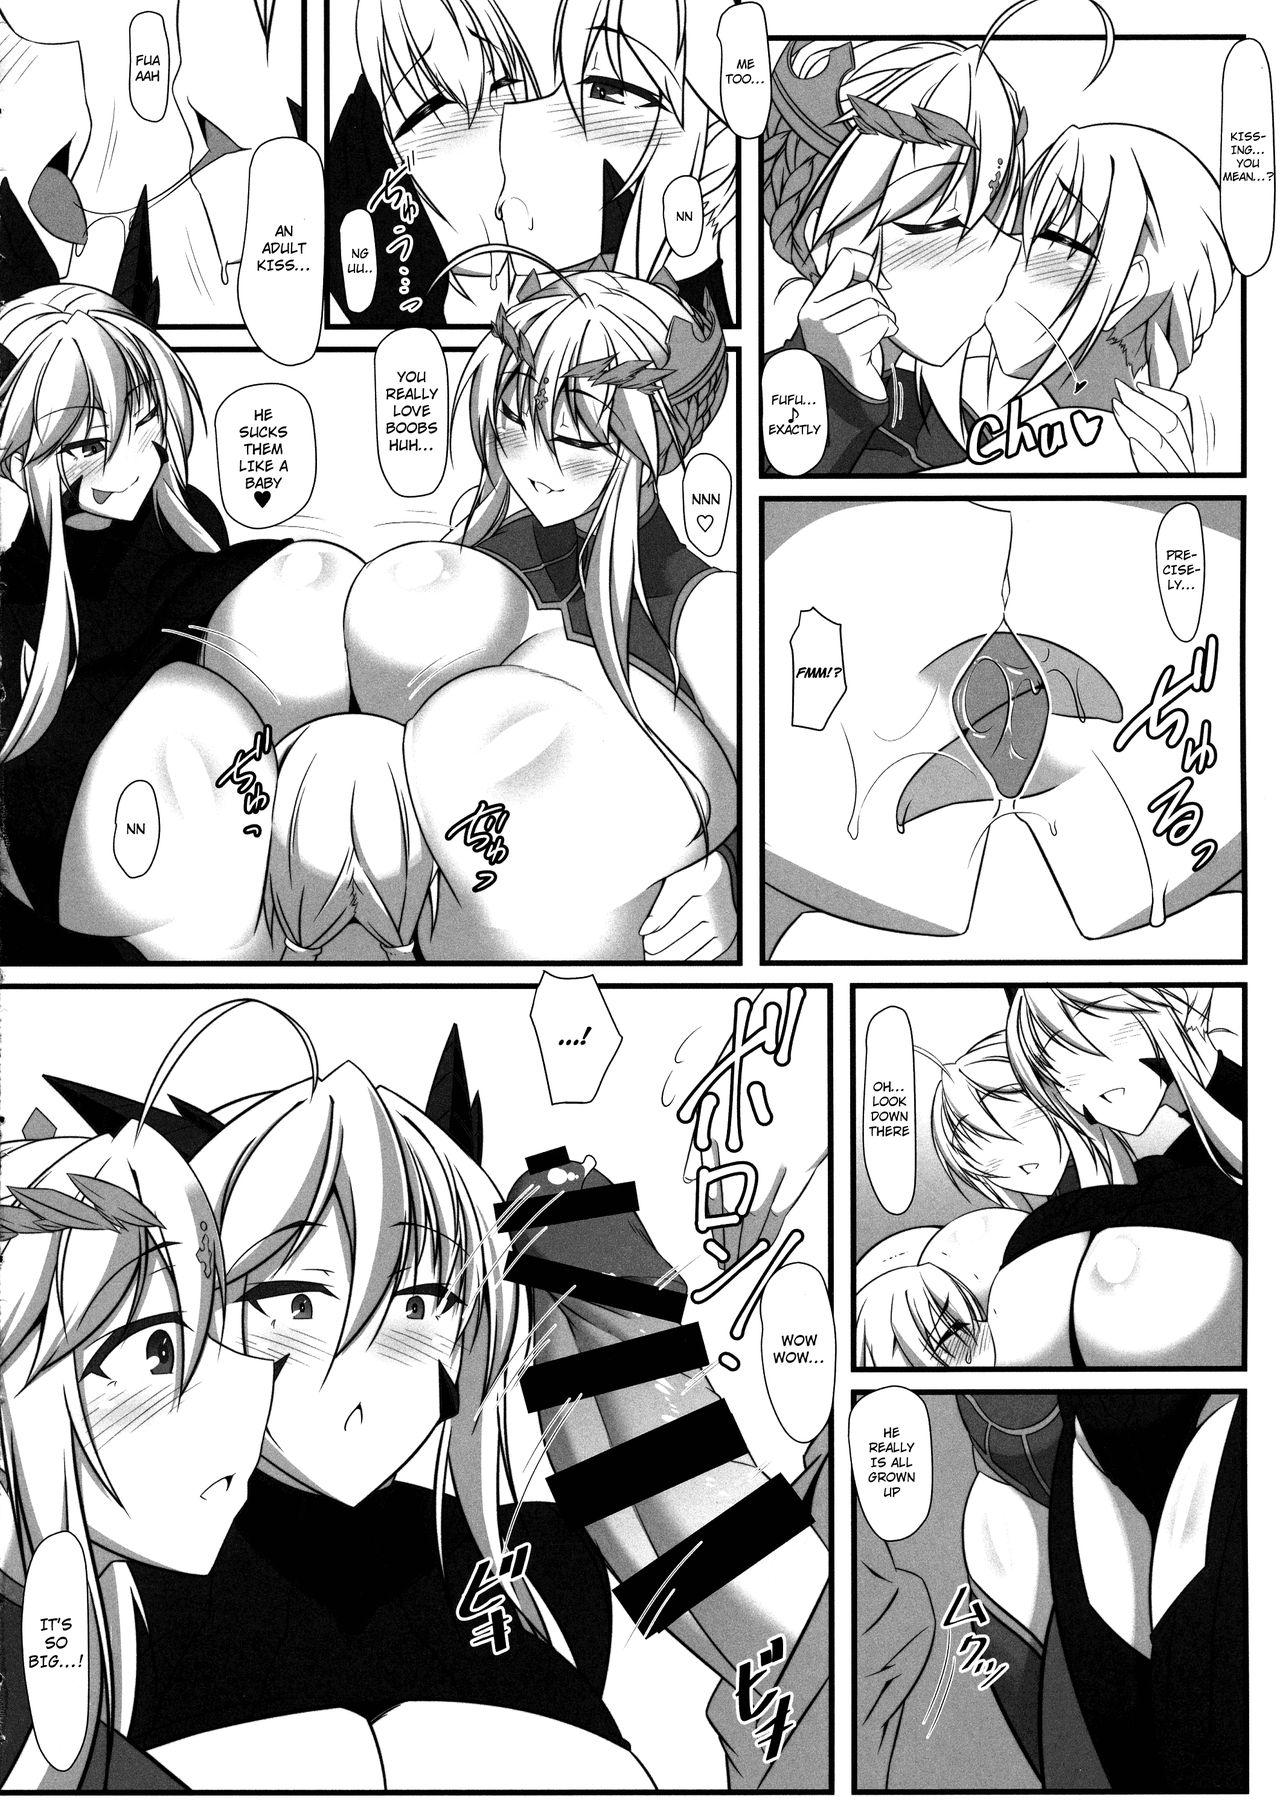 Piercing Souou to Maguau - Fate grand order Alone - Page 7